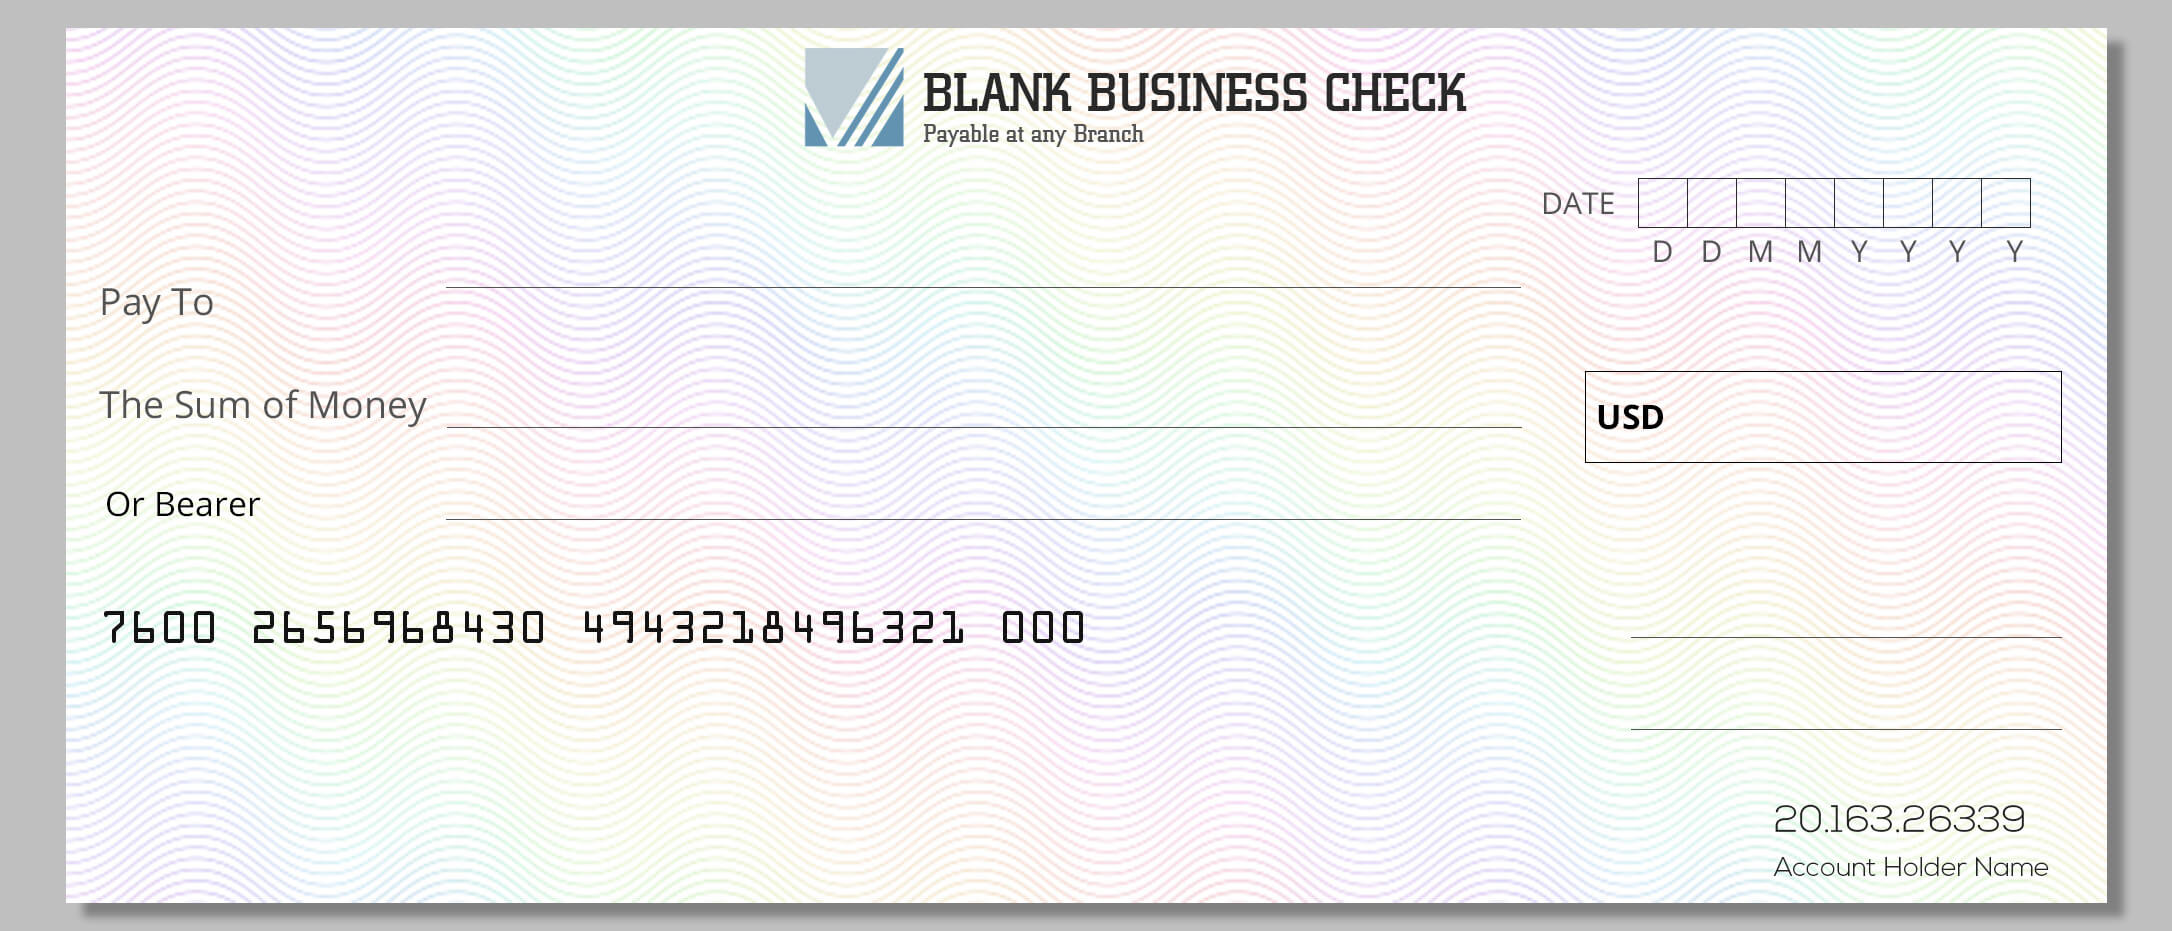 10 Printable Blank Business Check In Psd Photoshop Room Surf